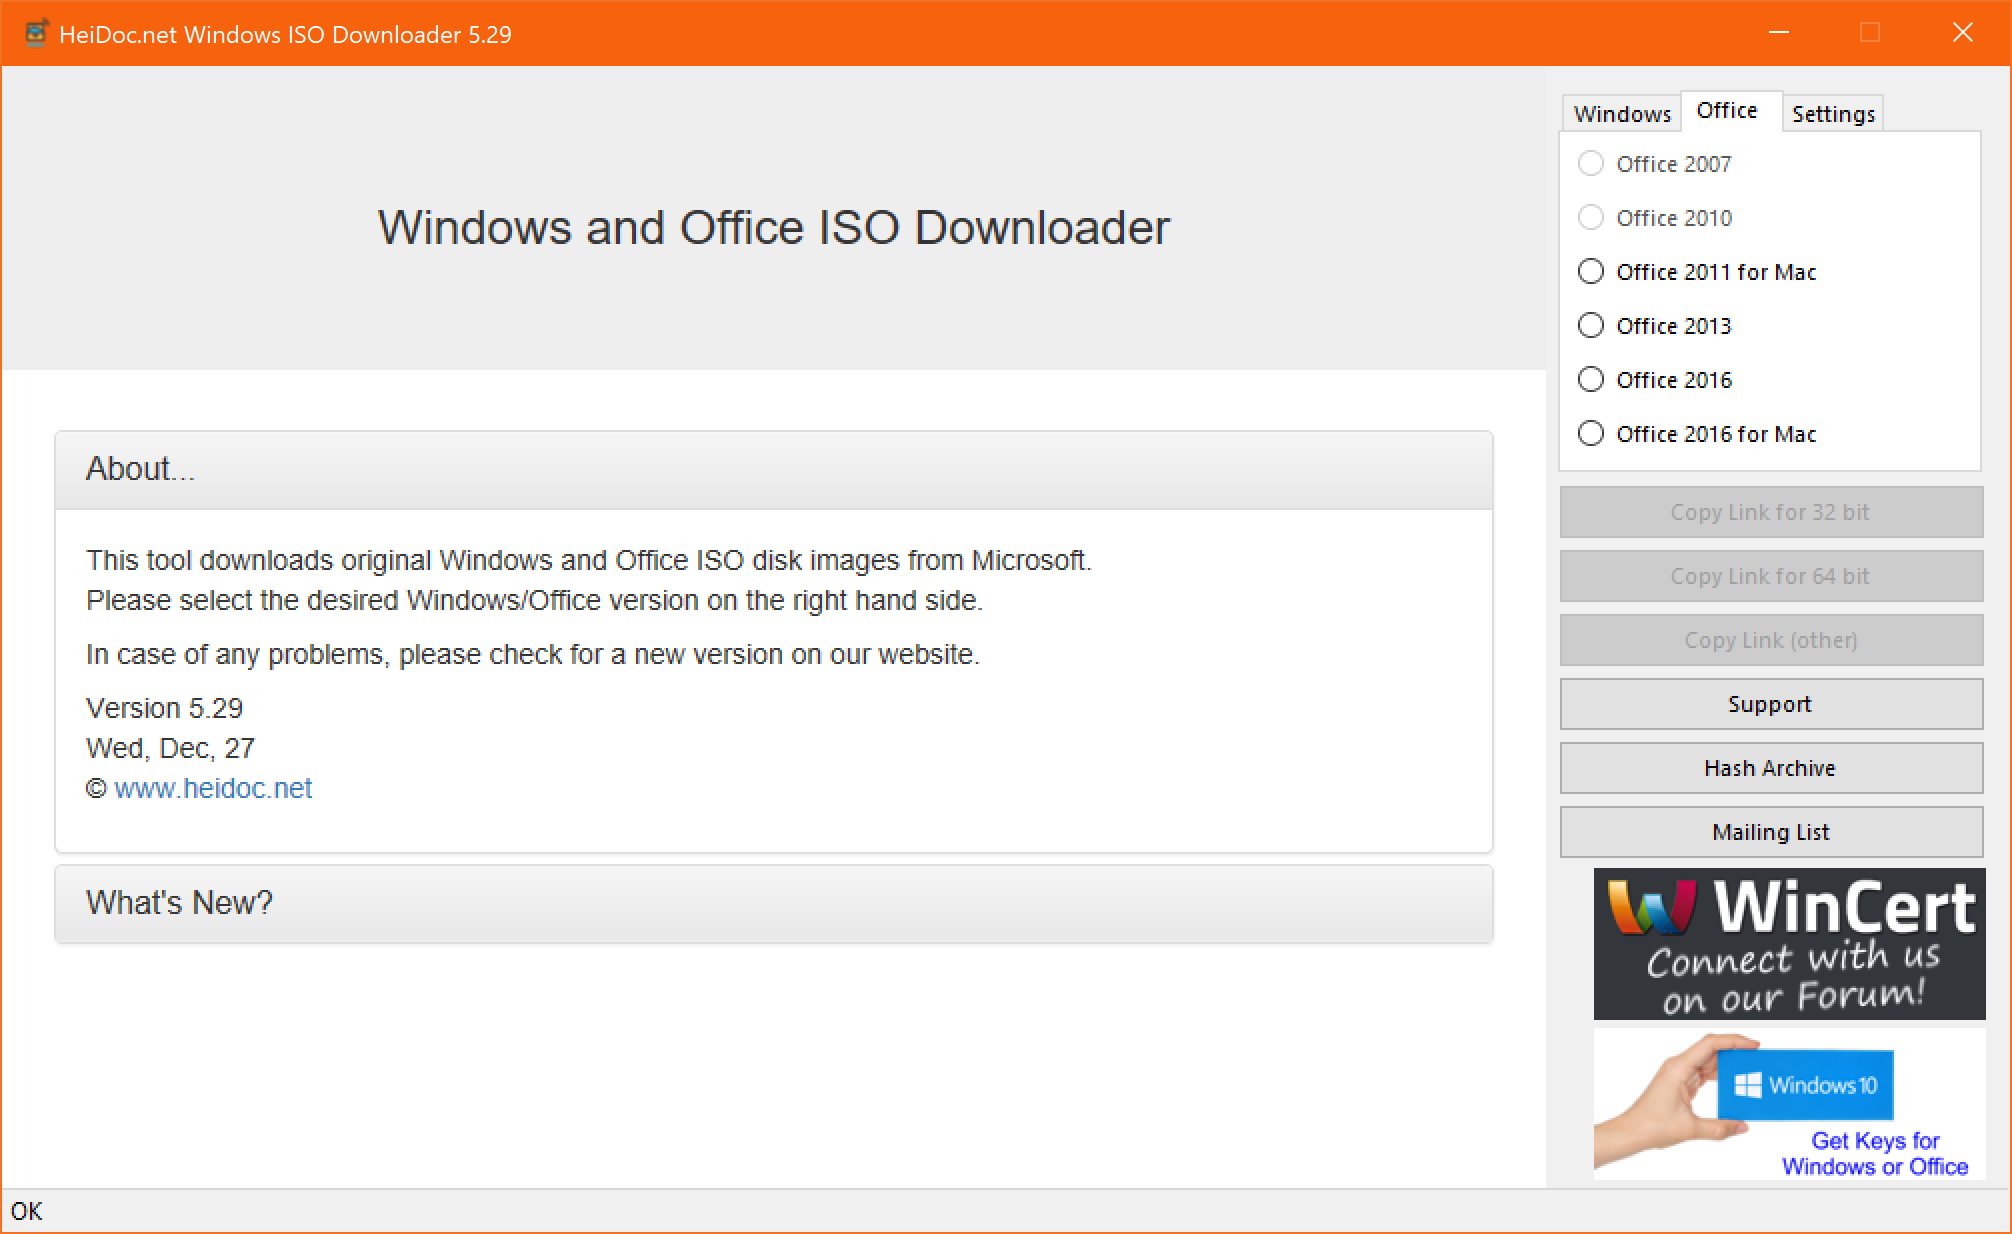 Microsoft Windows and Office ISO Downloader